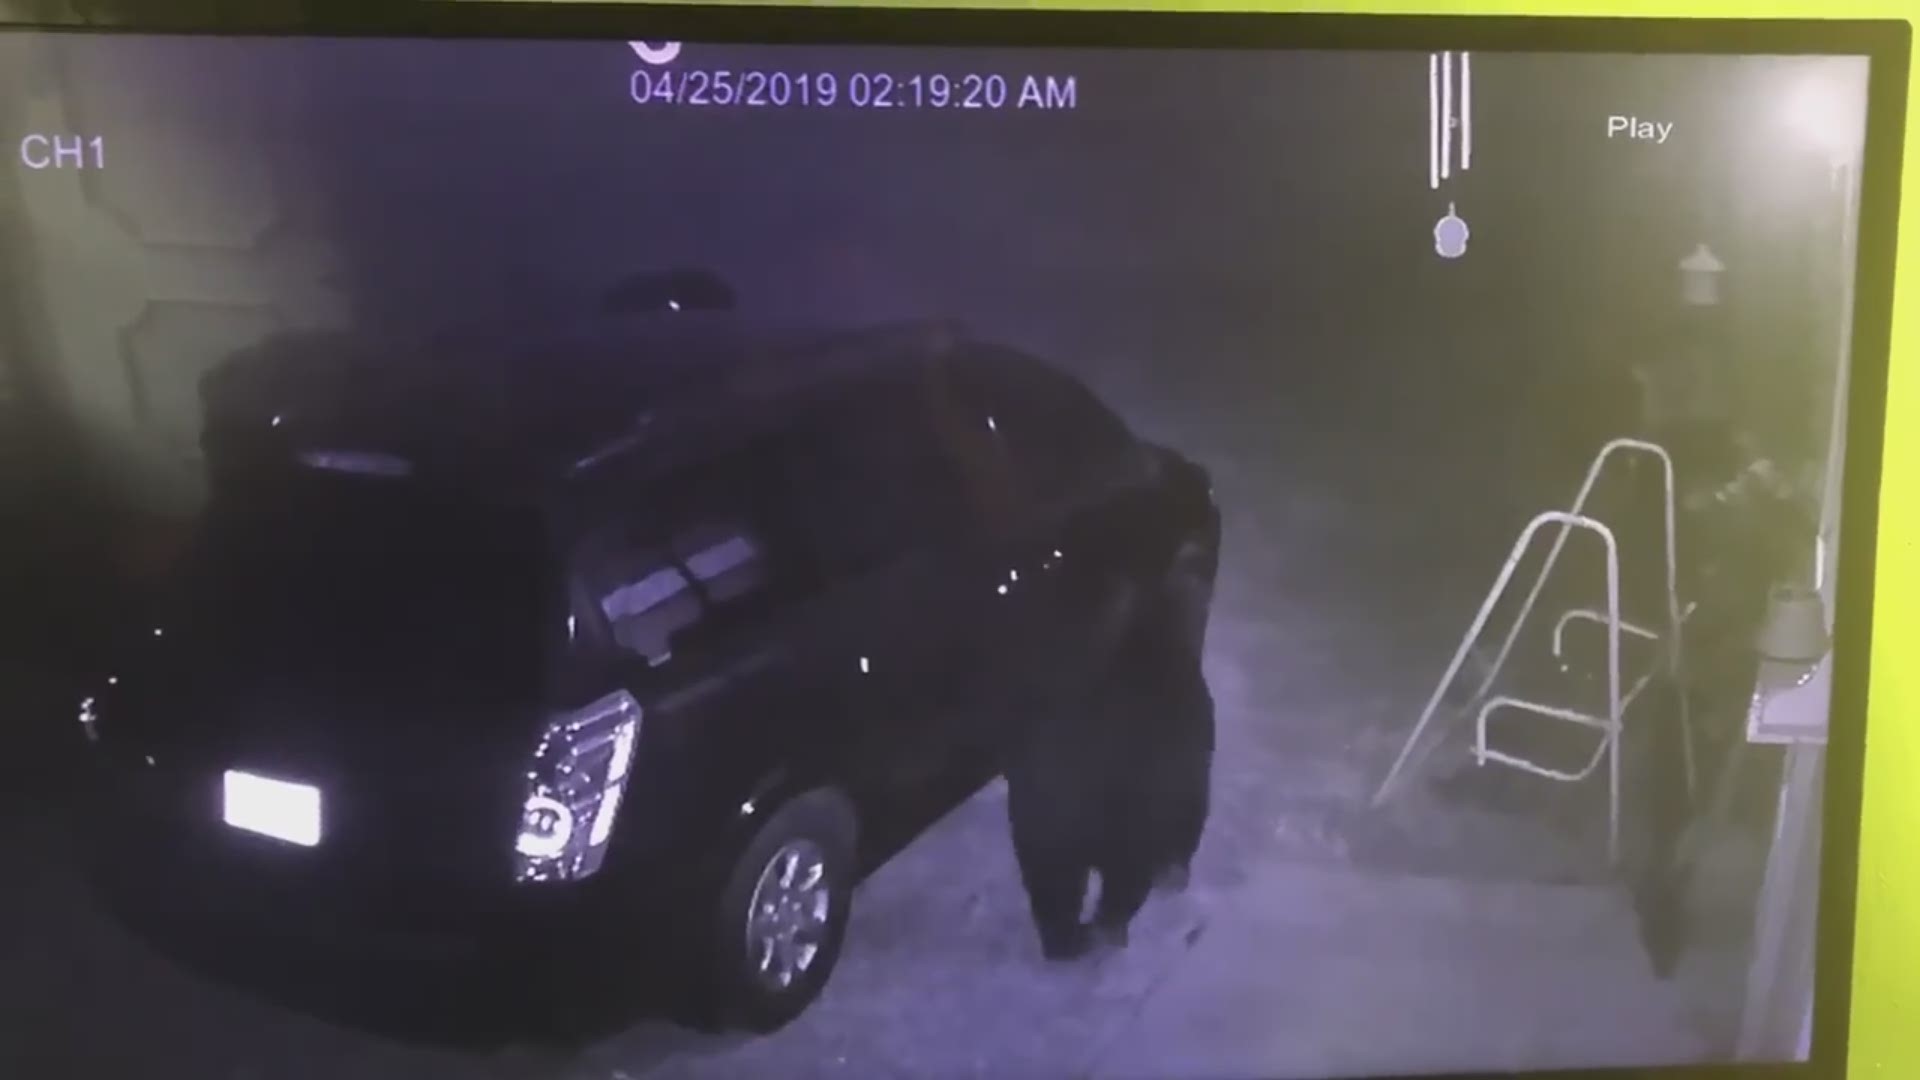 Oh bear. Surveillance footage shows a bear opening a woman's car, climb right in, takes food and walks away like it was a job.